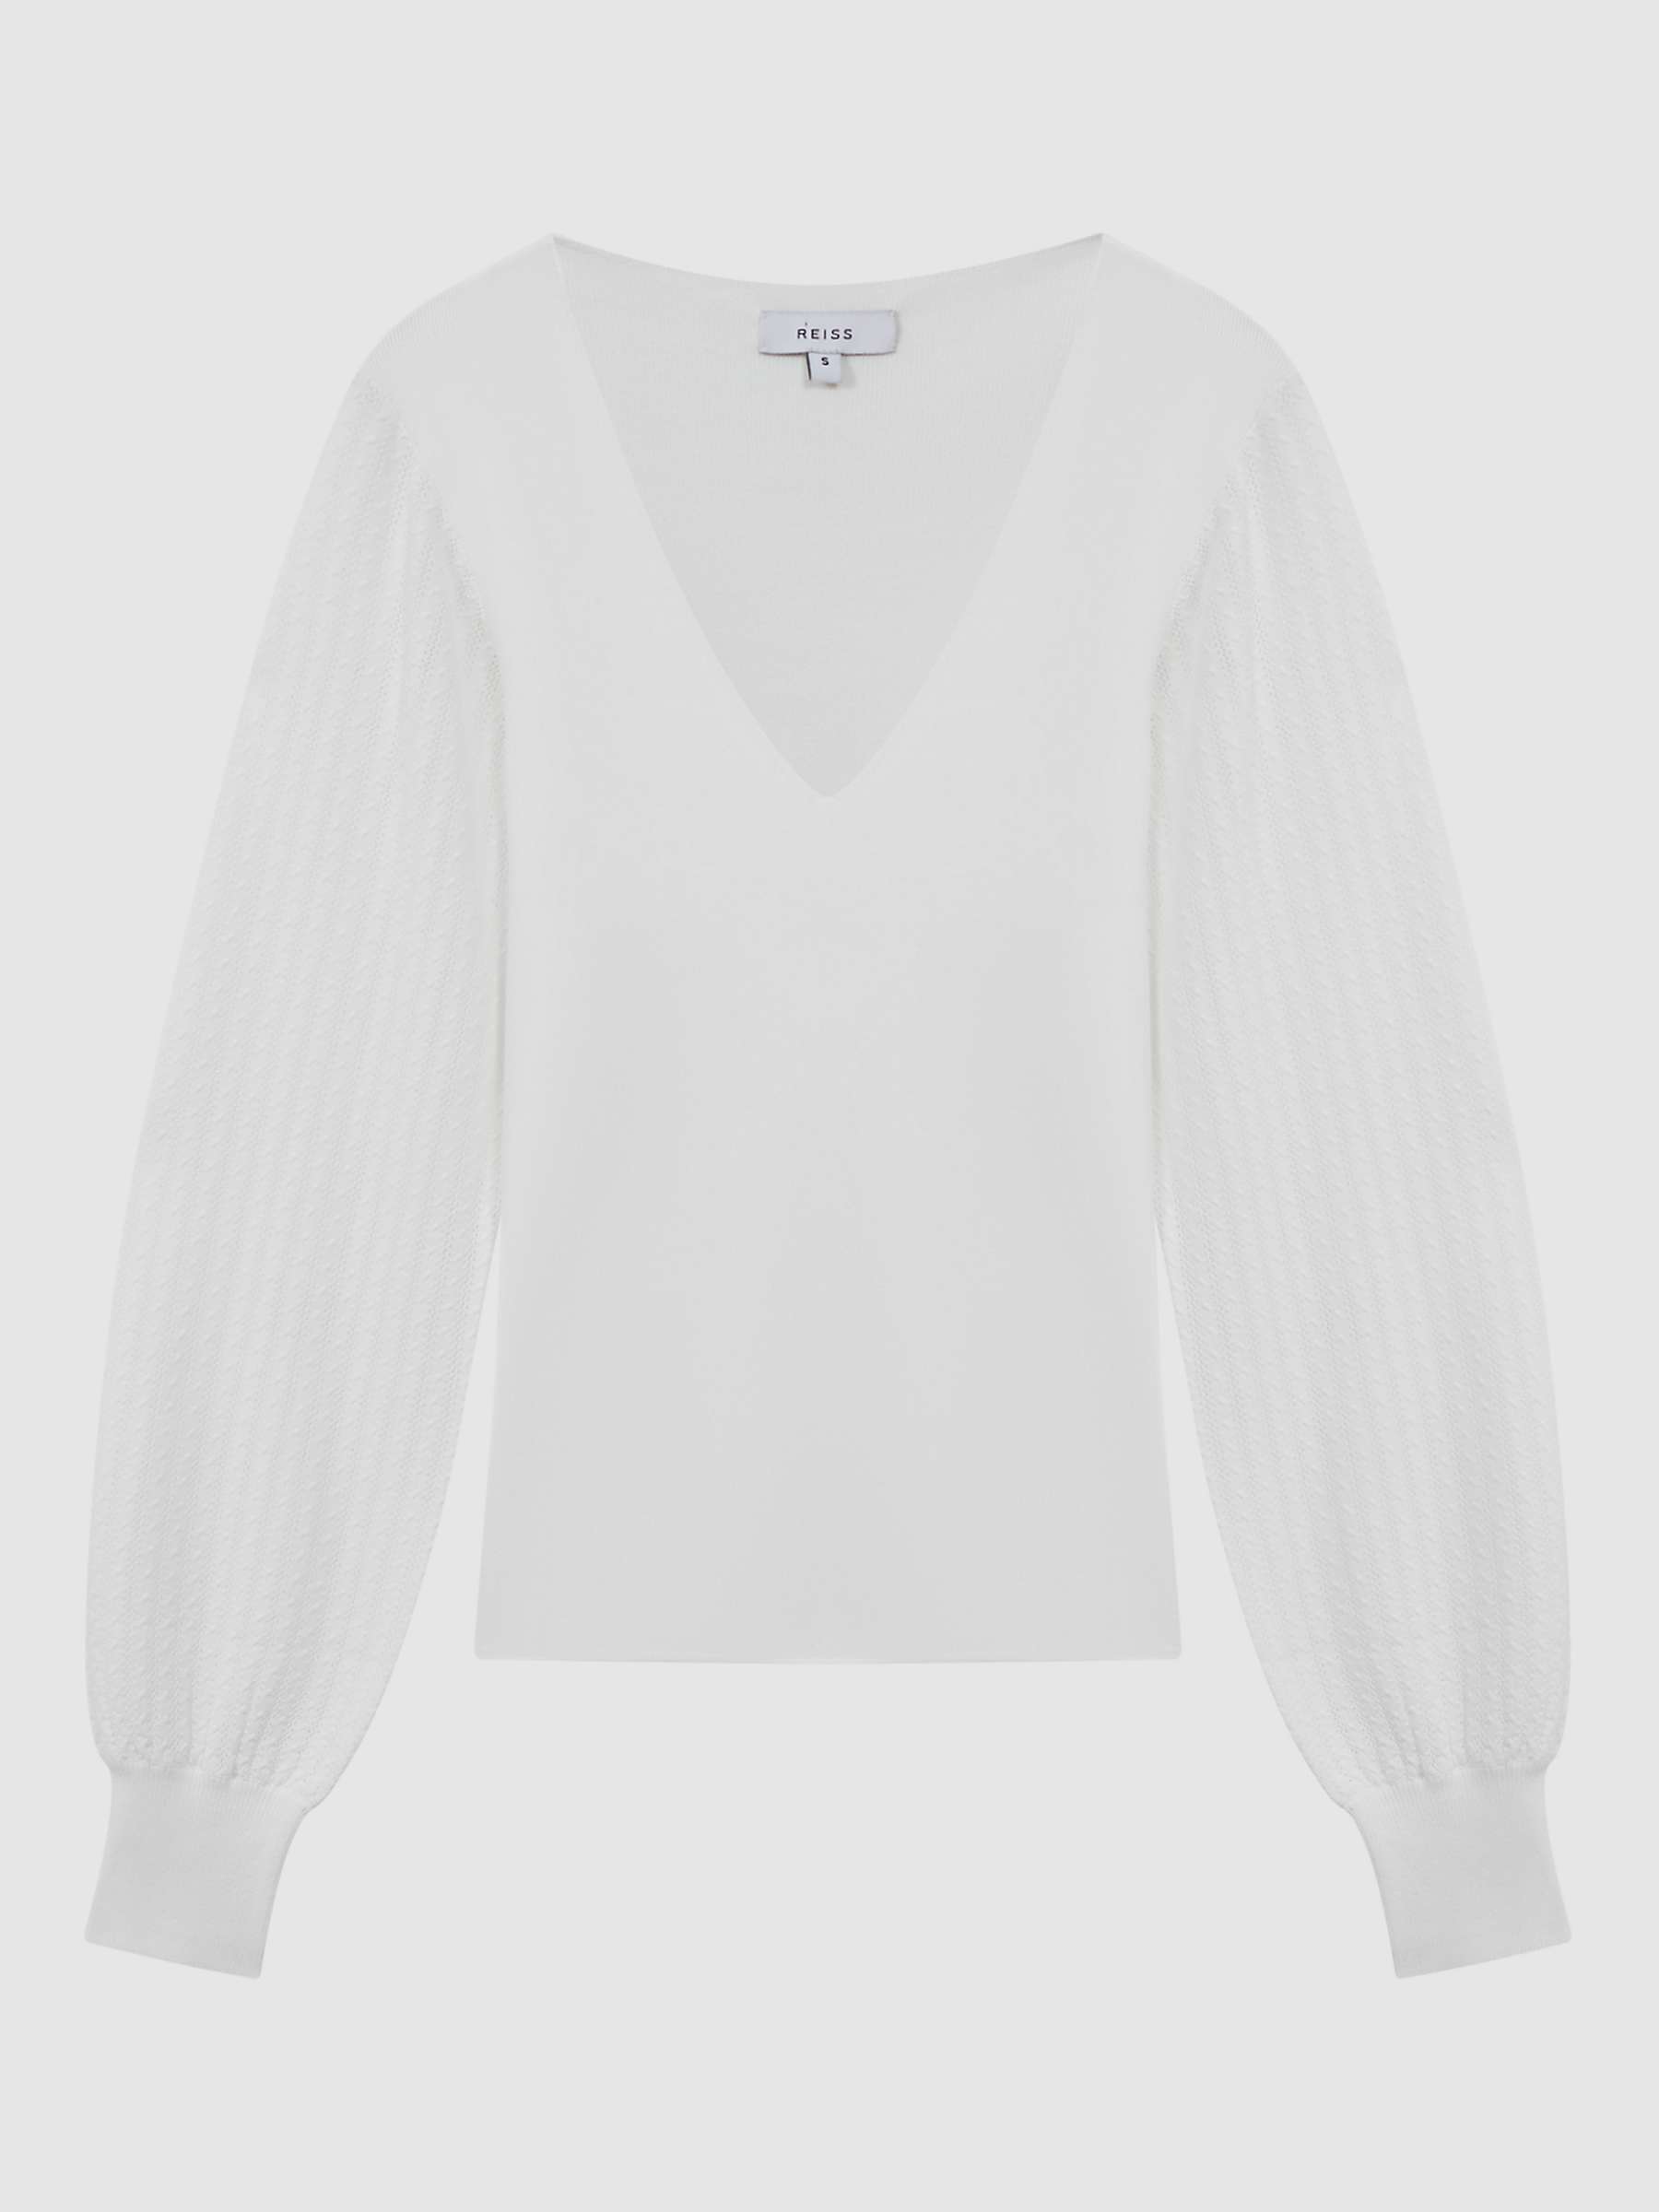 Buy Reiss Lexi Stitch Sleeve Knitted Top, Ivory Online at johnlewis.com